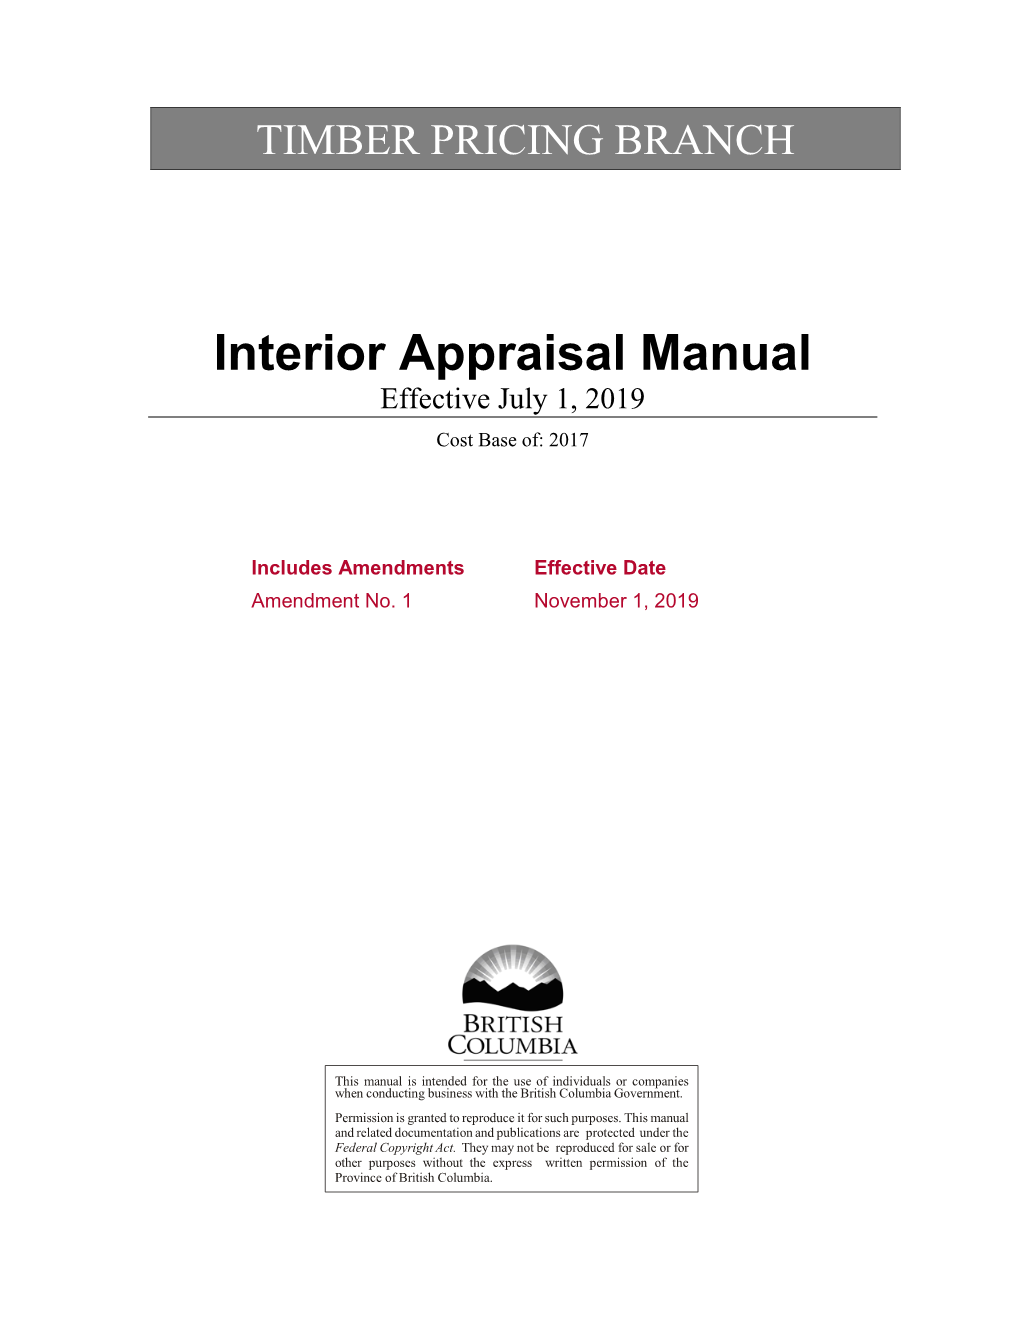 Interior Appraisal Manual Effective July 1, 2019 Cost Base Of: 2017